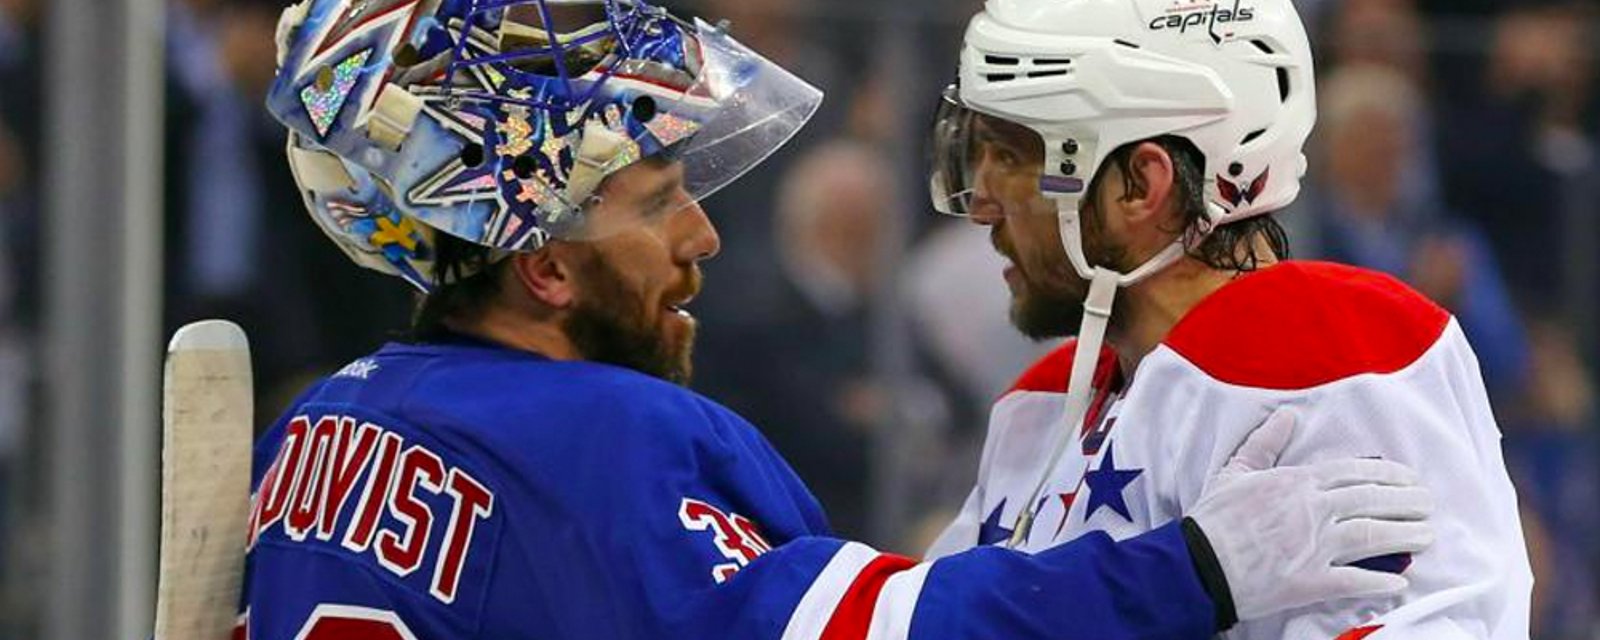 Ovechkin reacts to Lundqvist's news that he won't be joining the Capitals in 2021